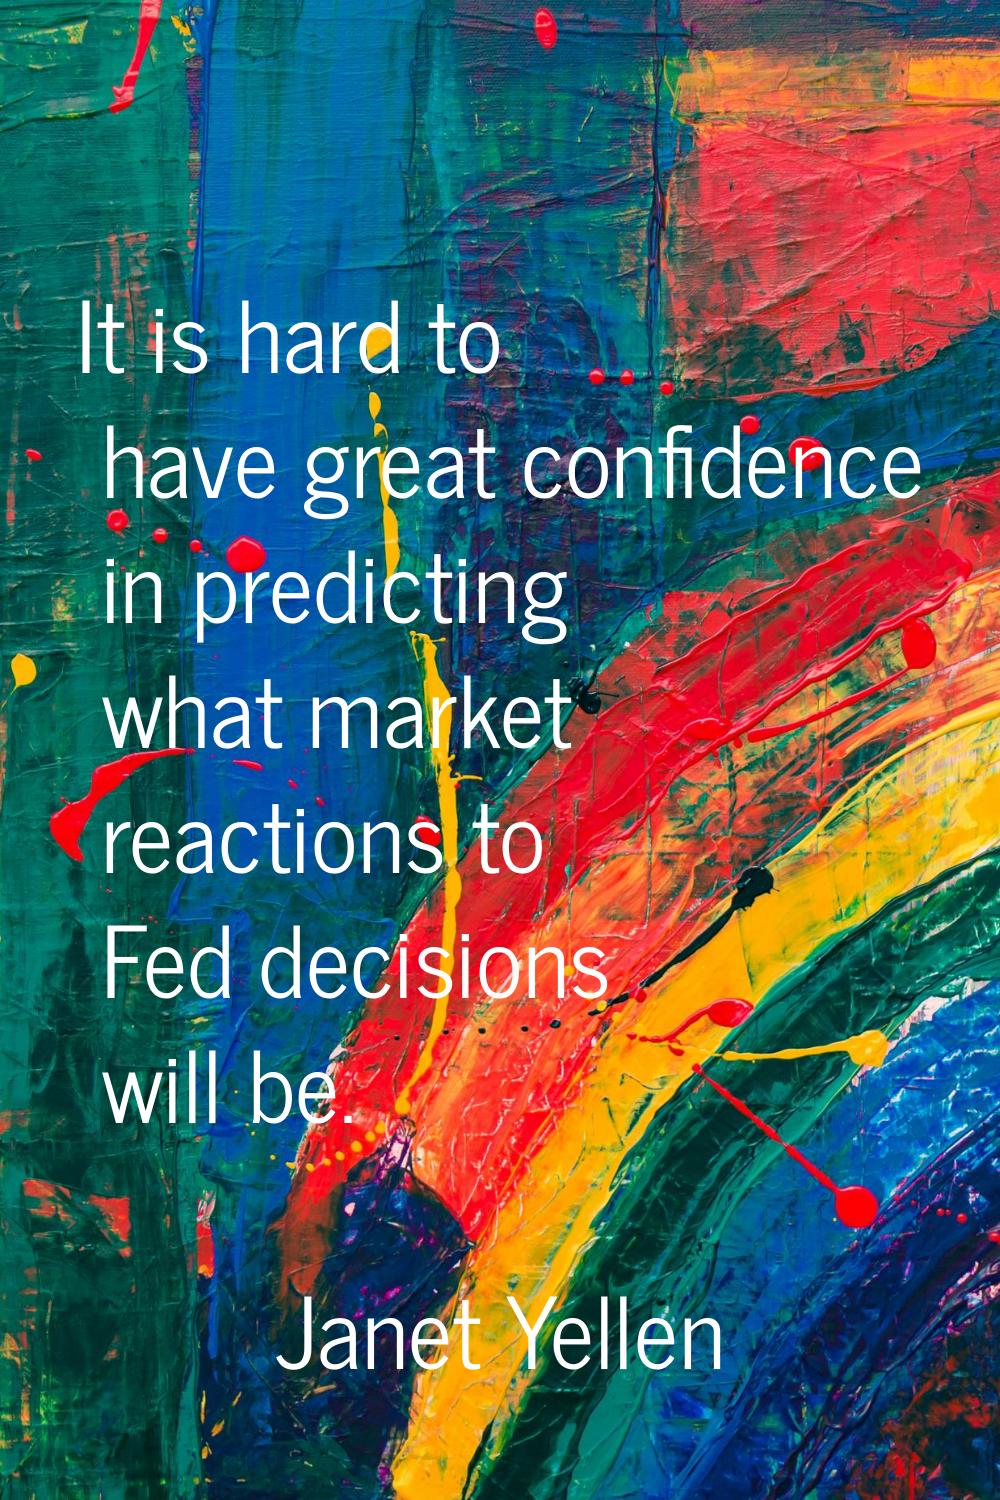 It is hard to have great confidence in predicting what market reactions to Fed decisions will be.